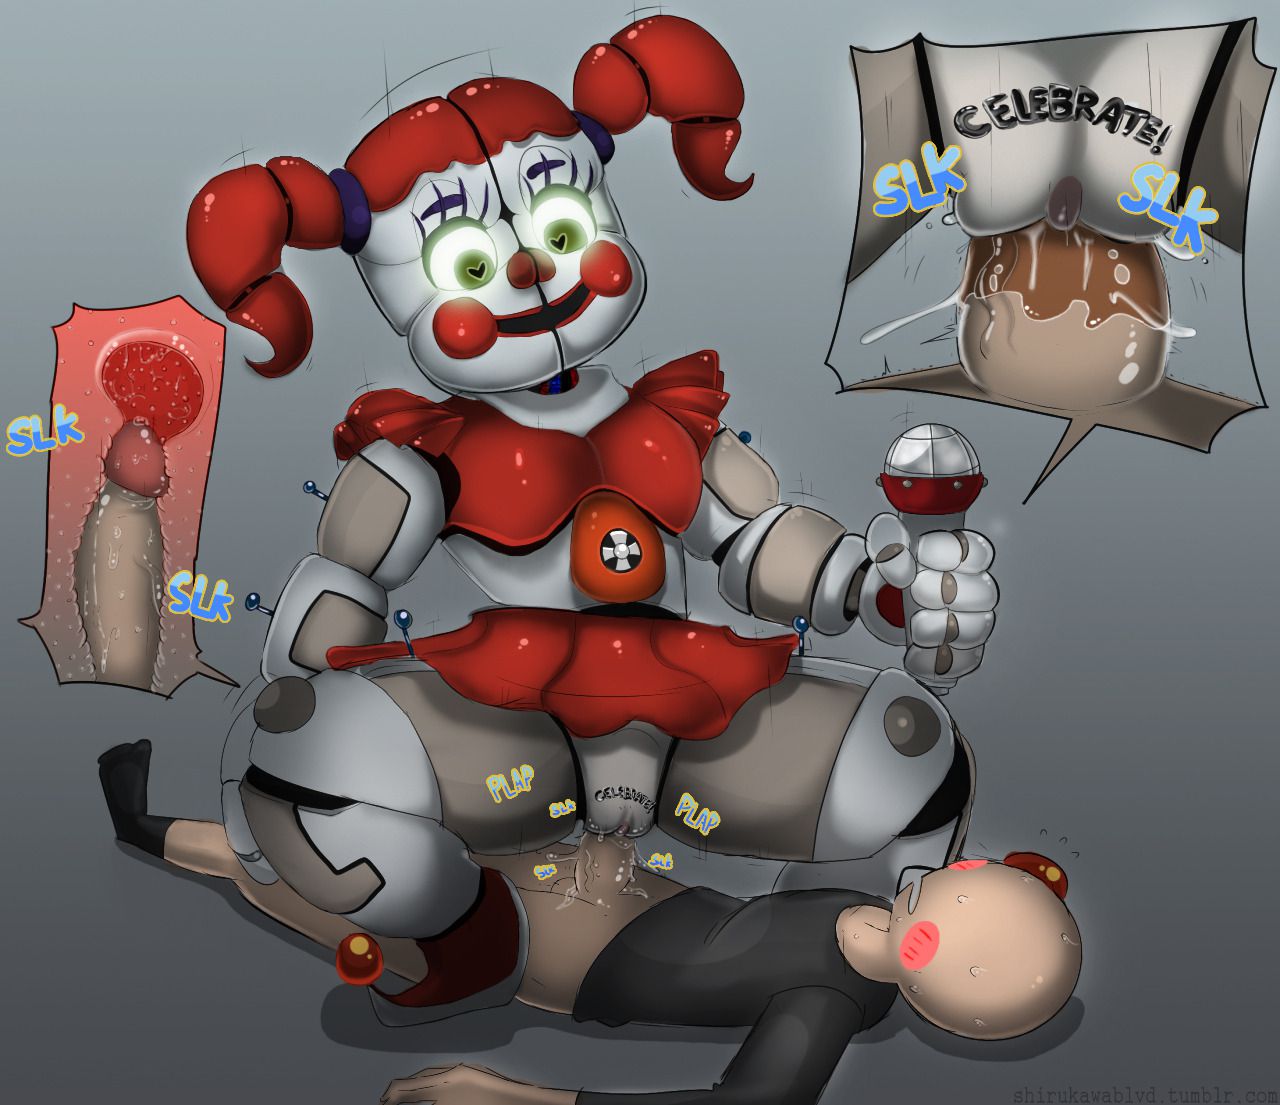 [EGG SHOPPE] Circus Baby (Five Nights at Freddy's) [English] 4